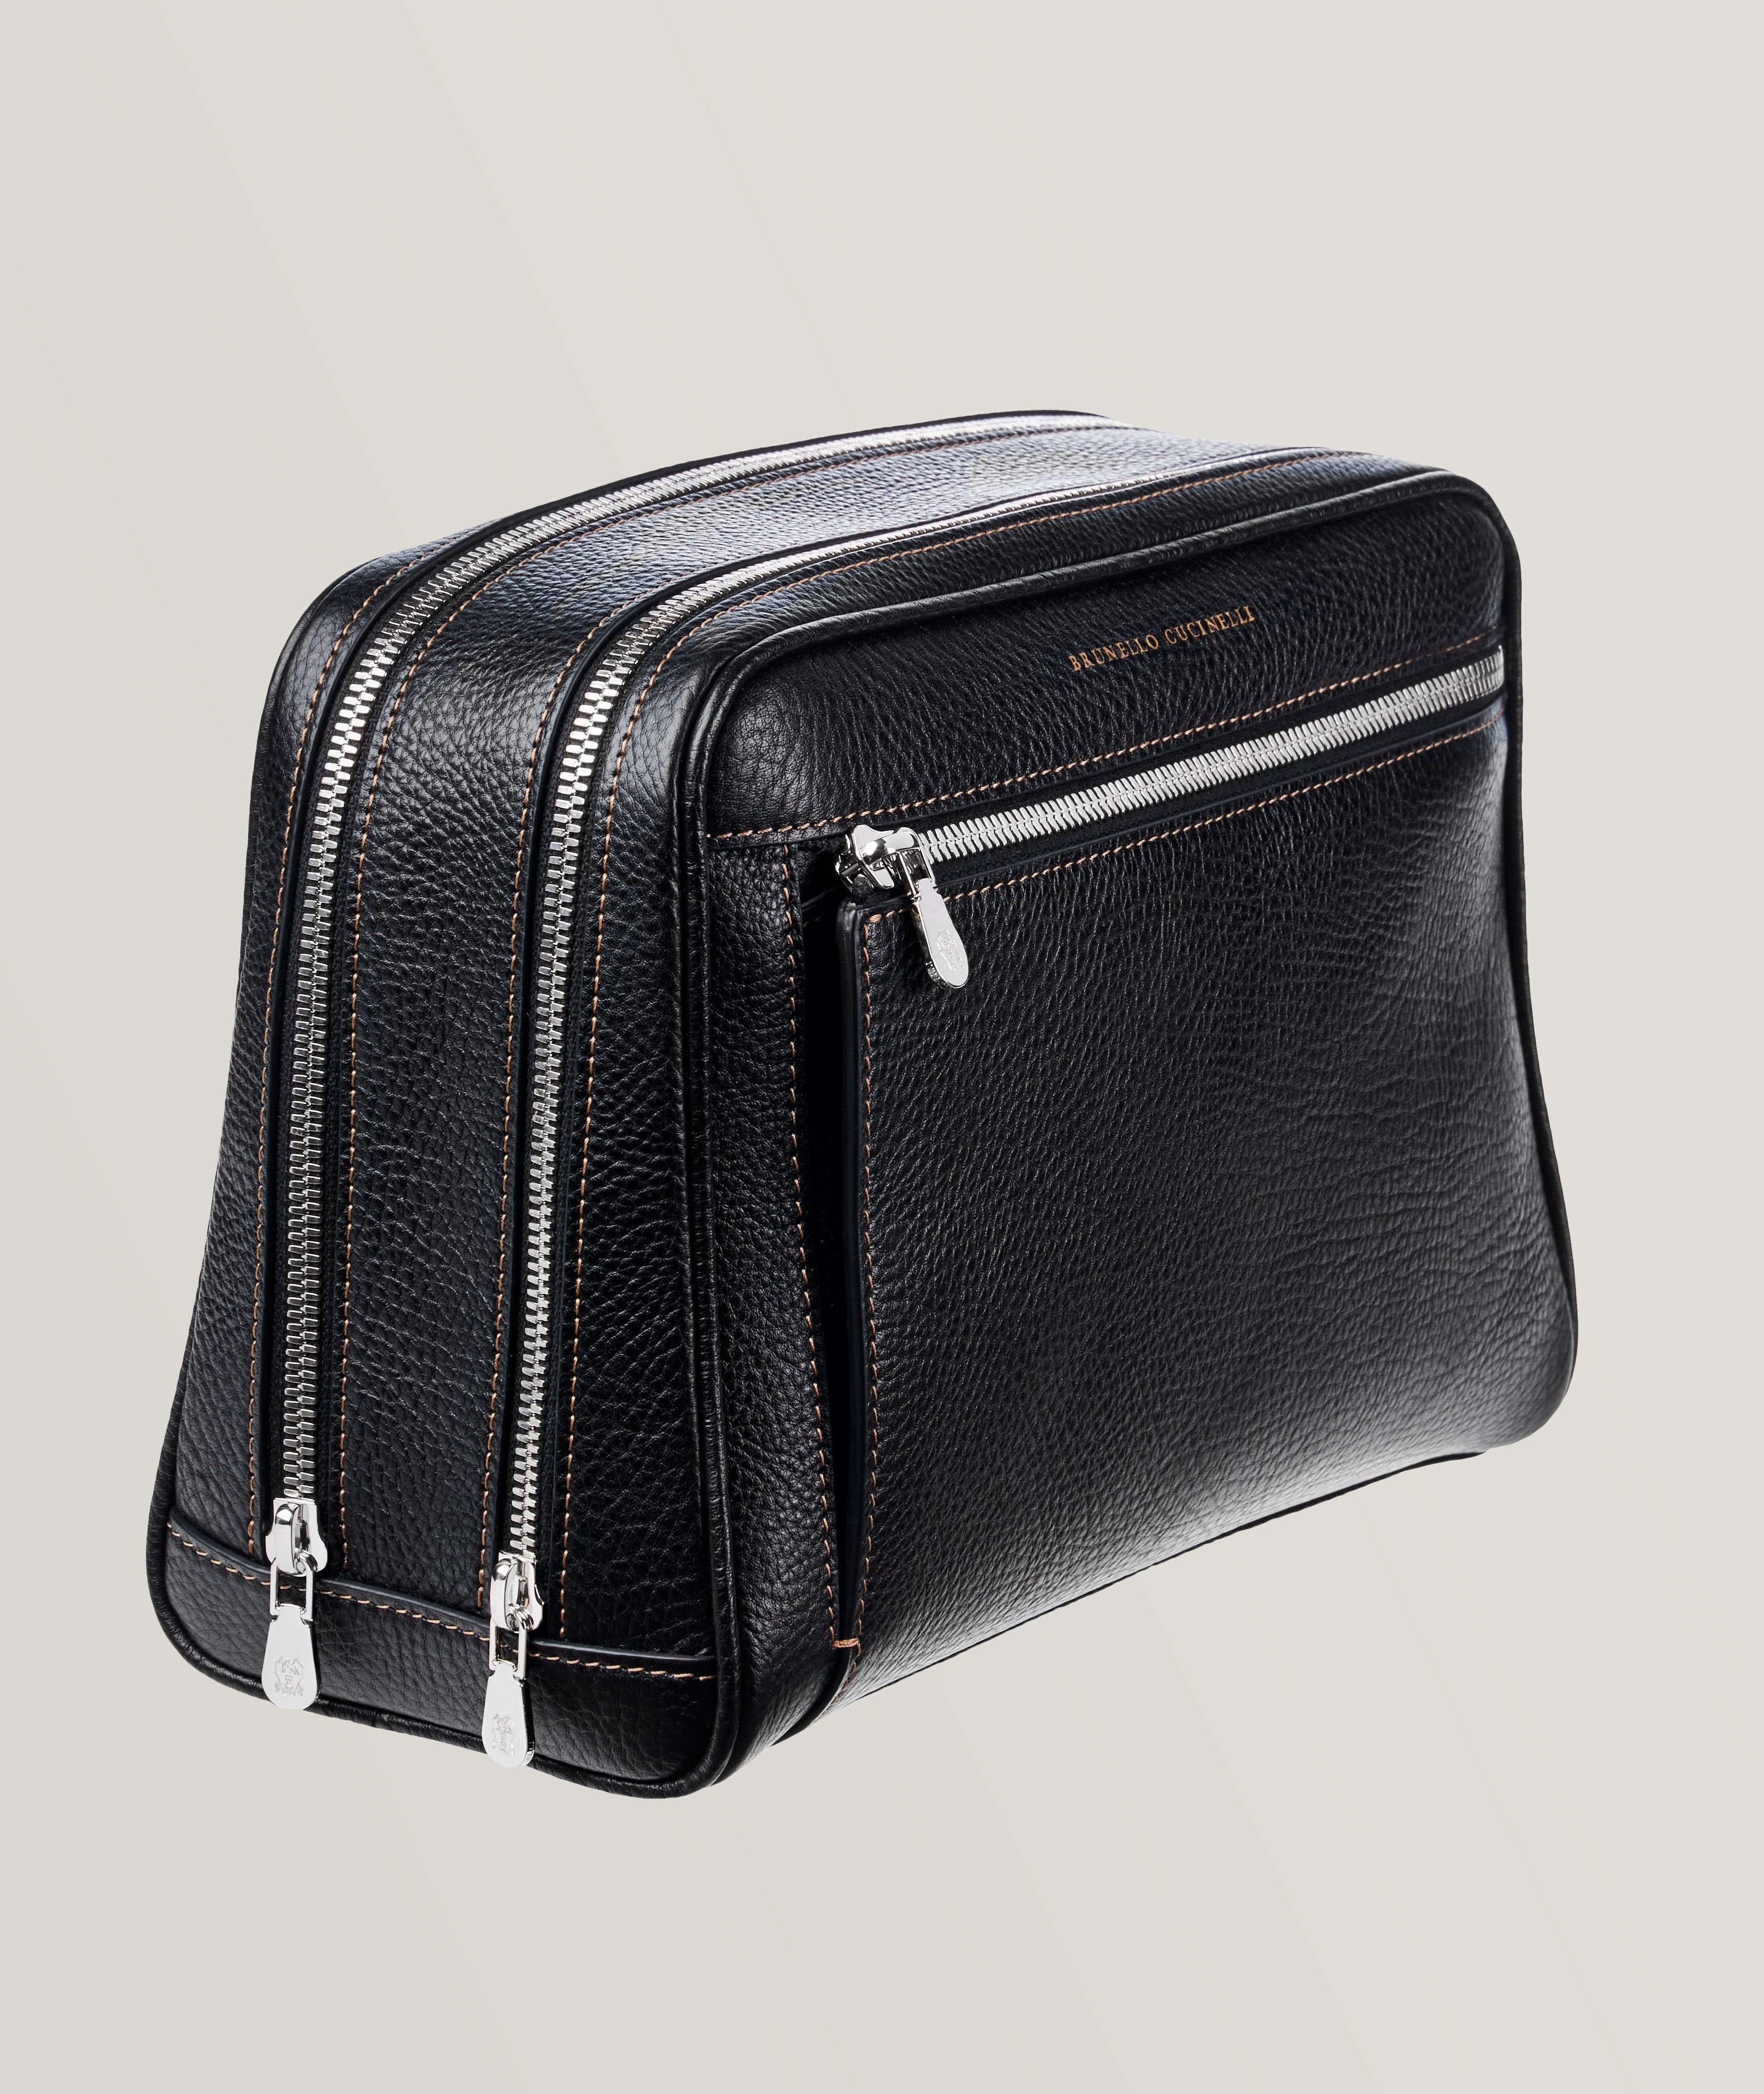 Grained Calfskin Toiletry Bag image 2